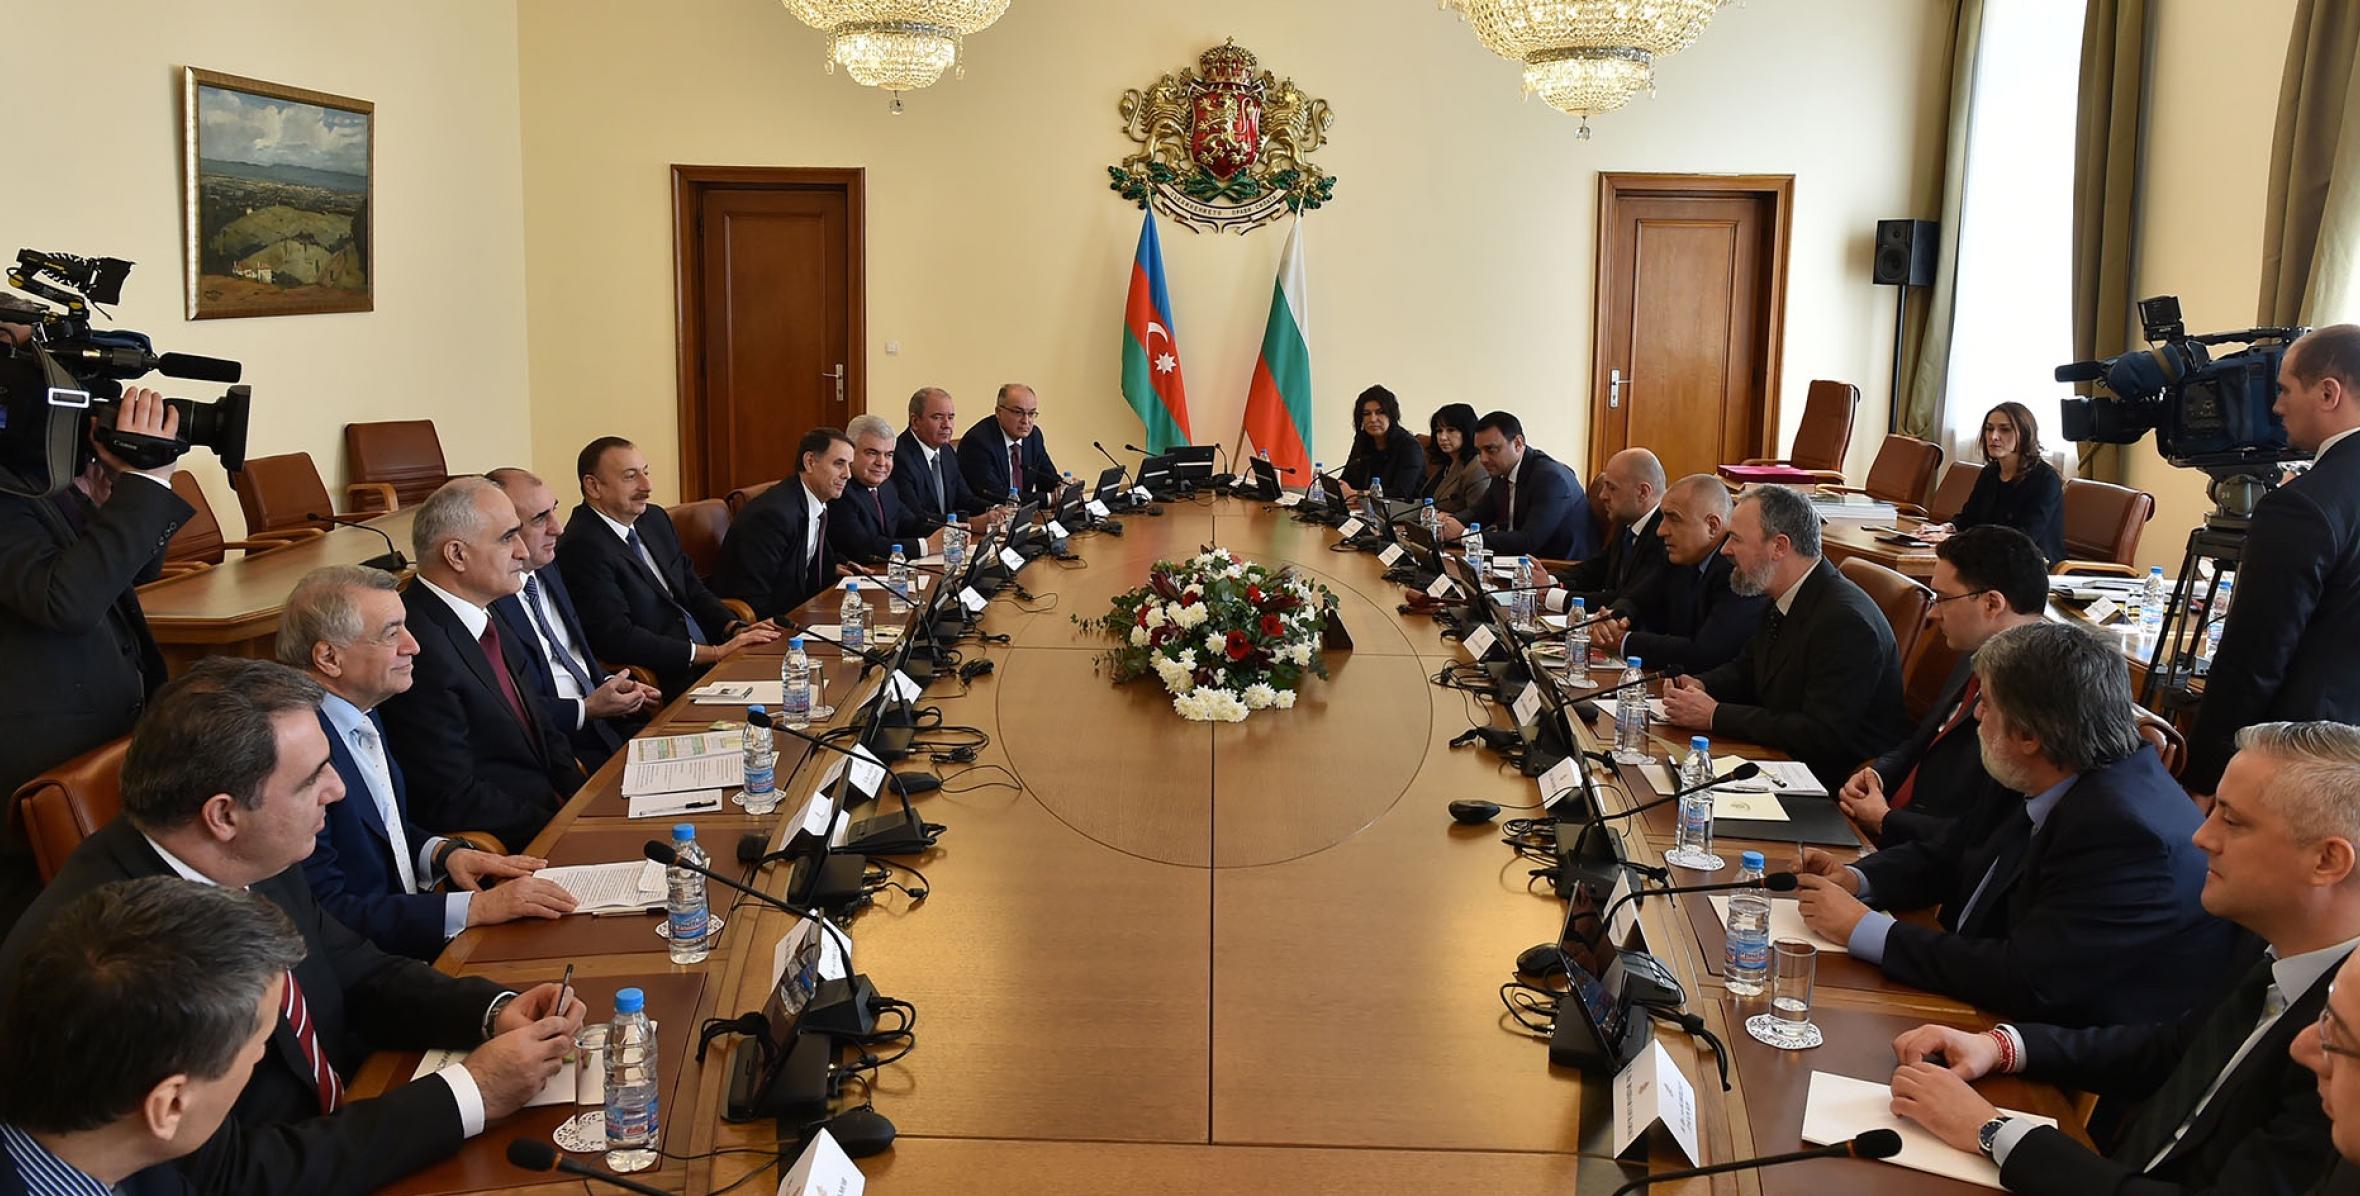 Ilham Aliyev and Bulgarian Prime Minister Boyko Borisov held an expanded meeting